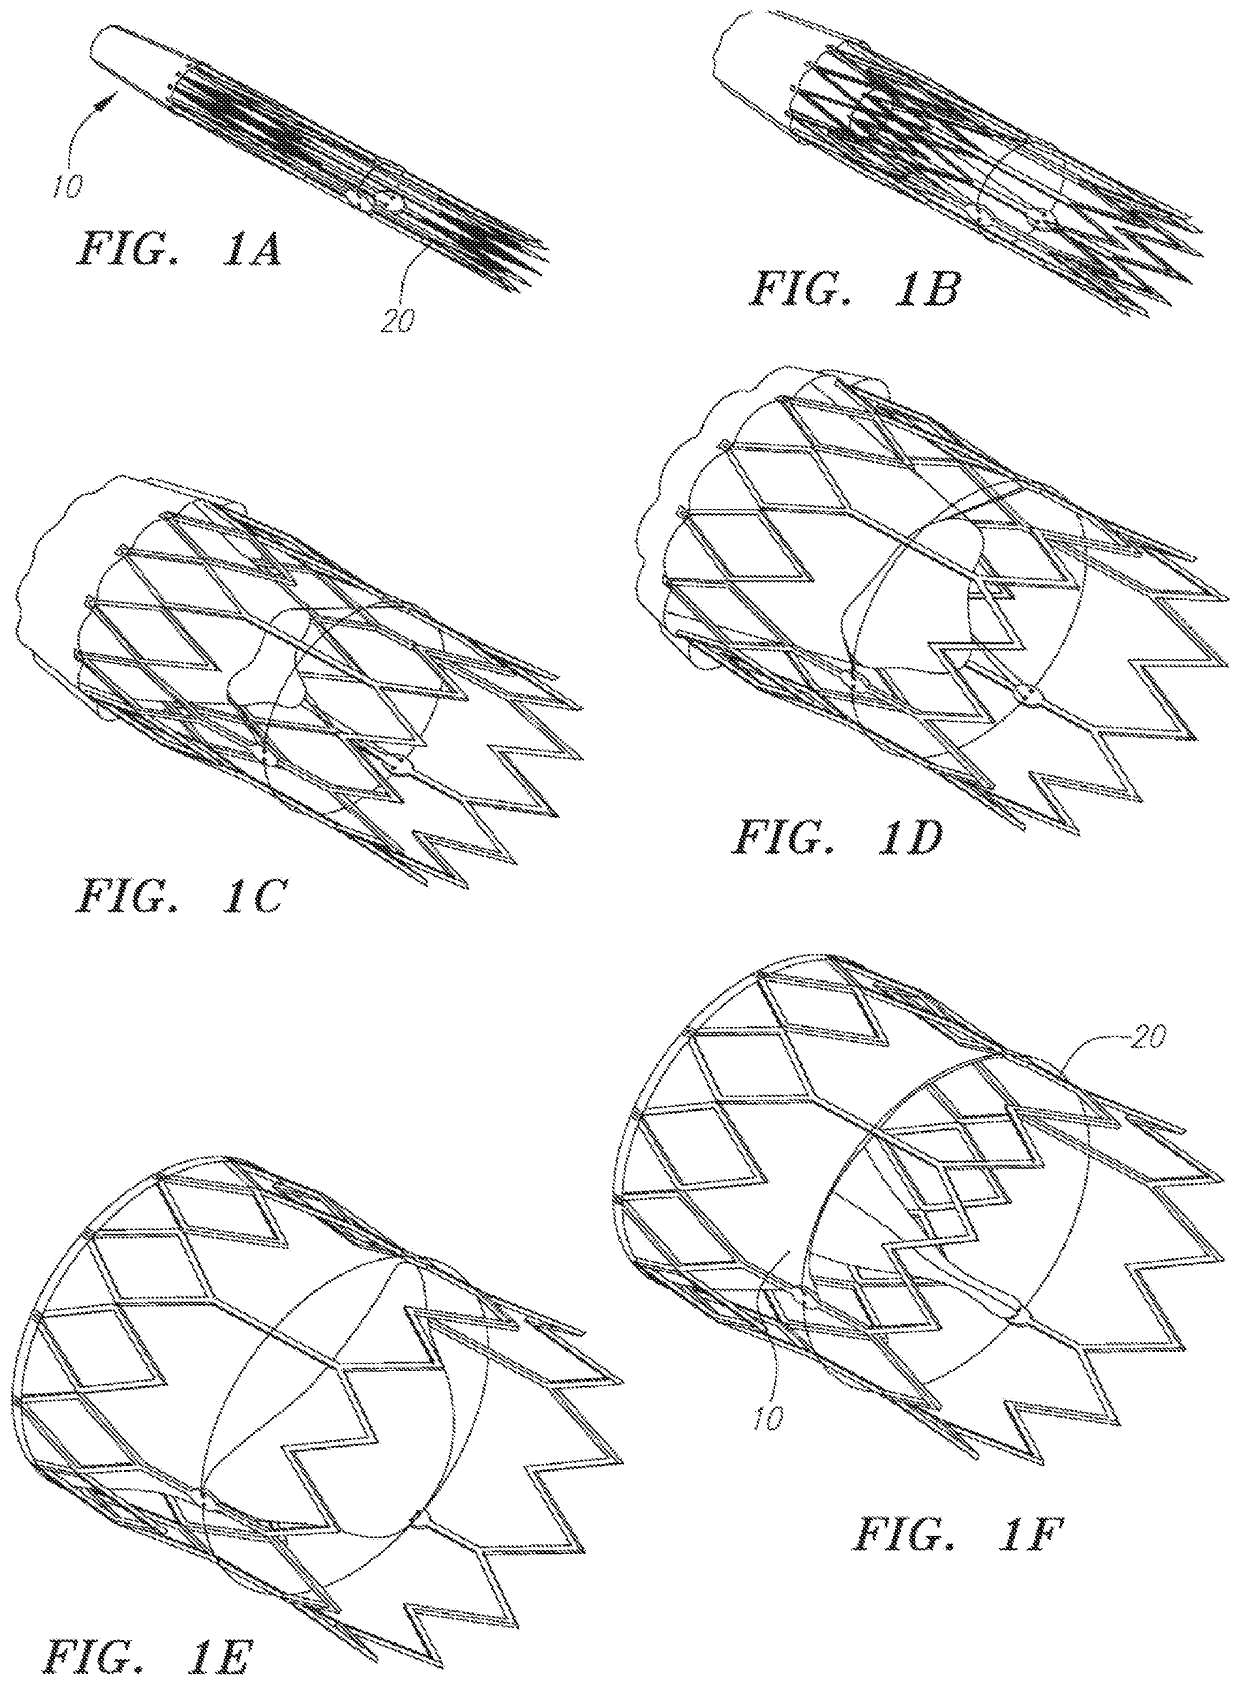 Percutaneous heart valve delivery systems